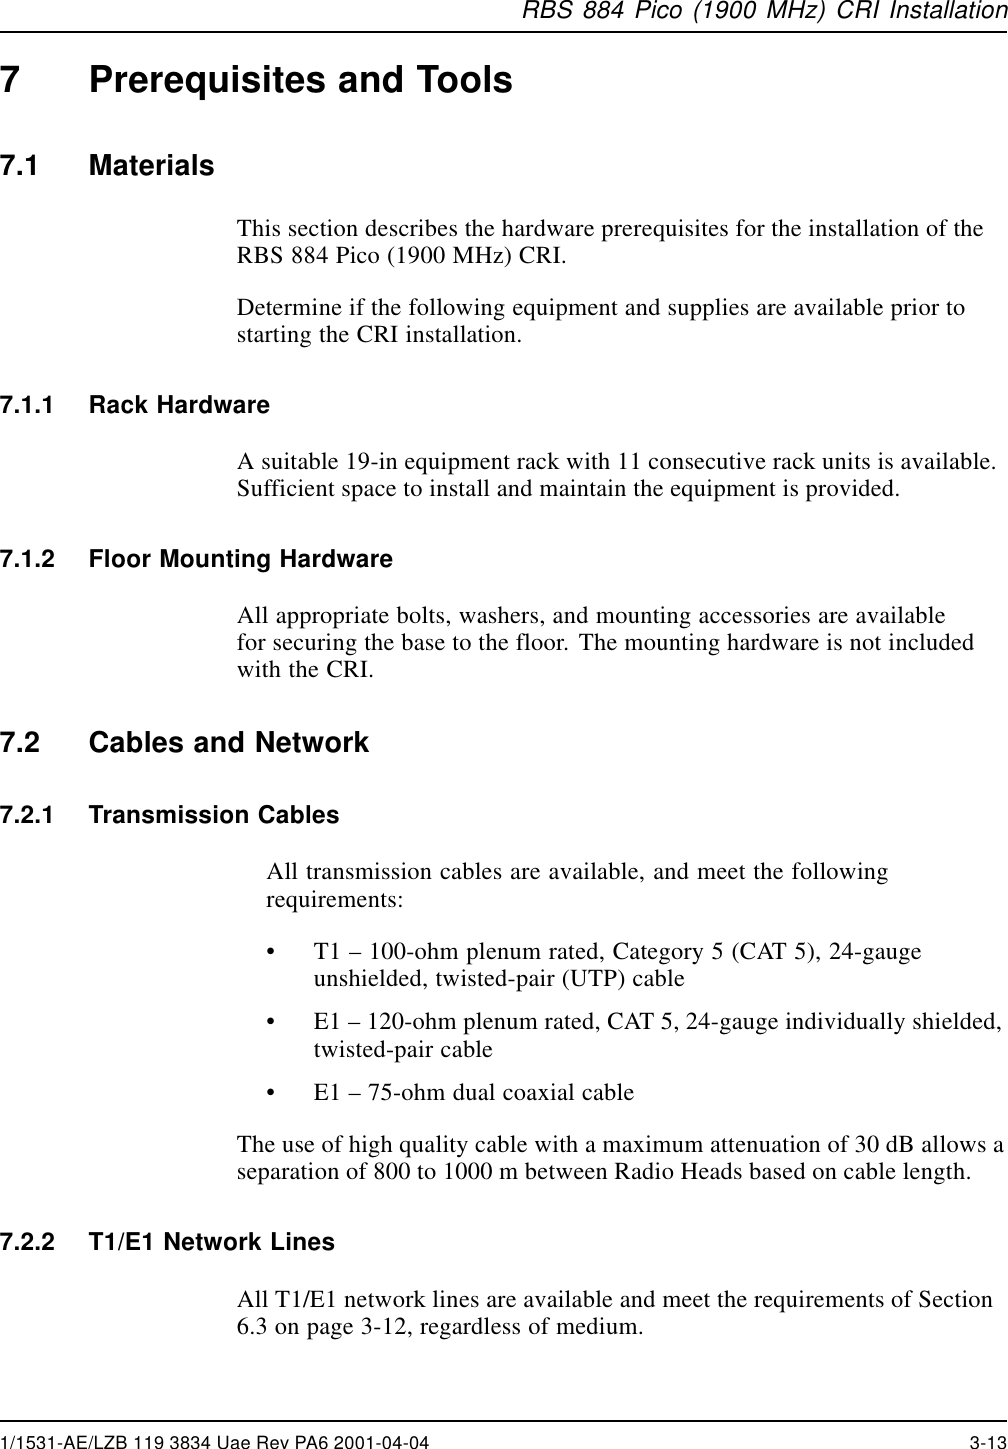 RBS 884 Pico (1900 MHz) CRI Installation7 Prerequisites and Tools7.1 MaterialsThis section describes the hardware prerequisites for the installation of theRBS 884 Pico (1900 MHz) CRI.Determine if the following equipment and supplies are available prior tostarting the CRI installation.7.1.1 Rack HardwareA suitable 19-in equipment rack with 11 consecutive rack units is available.Sufficient space to install and maintain the equipment is provided.7.1.2 Floor Mounting HardwareAll appropriate bolts, washers, and mounting accessories are availablefor securing the base to the floor. The mounting hardware is not includedwith the CRI.7.2 Cables and Network7.2.1 Transmission CablesAll transmission cables are available, and meet the followingrequirements:•T1 –100-ohm plenum rated, Category 5 (CAT 5), 24-gaugeunshielded, twisted-pair (UTP) cable•E1 –120-ohm plenum rated, CAT 5, 24-gauge individually shielded,twisted-pair cable•E1 –75-ohm dual coaxial cableThe use of high quality cable with a maximum attenuation of 30 dB allows aseparation of 800 to 1000 m between Radio Heads based on cable length.7.2.2 T1/E1 Network LinesAll T1/E1 network lines are available and meet the requirements of Section6.3 on page 3-12, regardless of medium.1/1531-AE/LZB 119 3834 Uae Rev PA6 2001-04-04 3-13